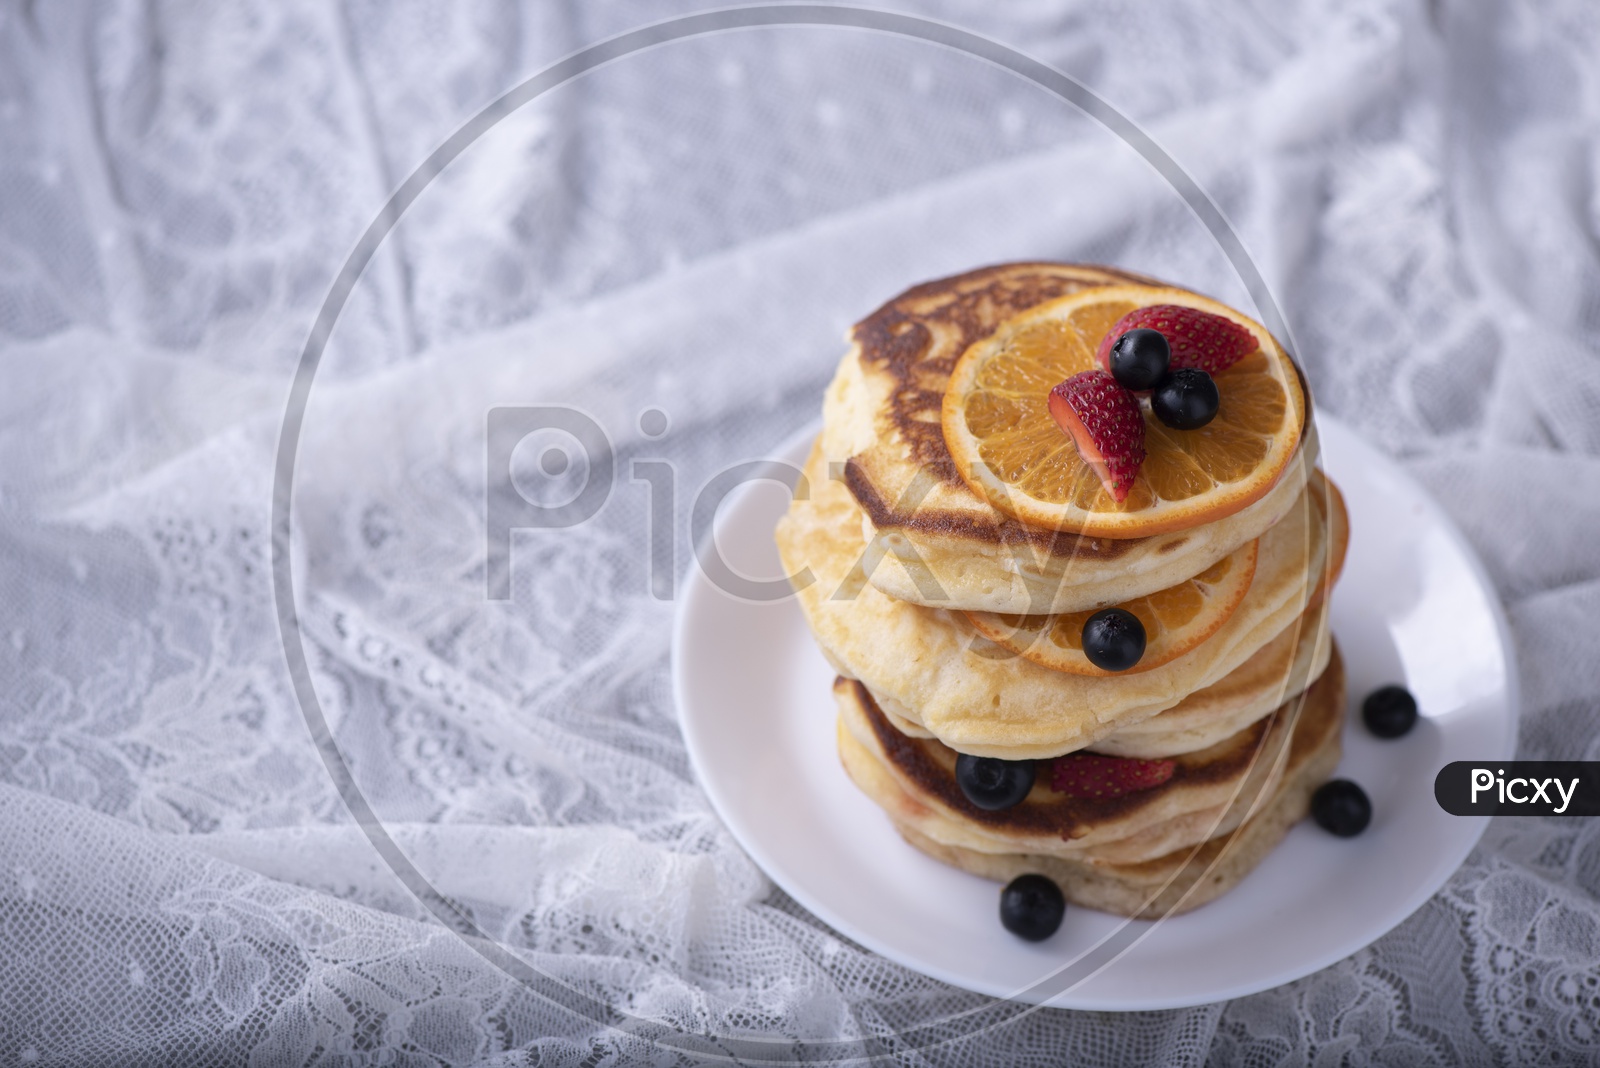 Pancake stack with Strawberry and Blueberry